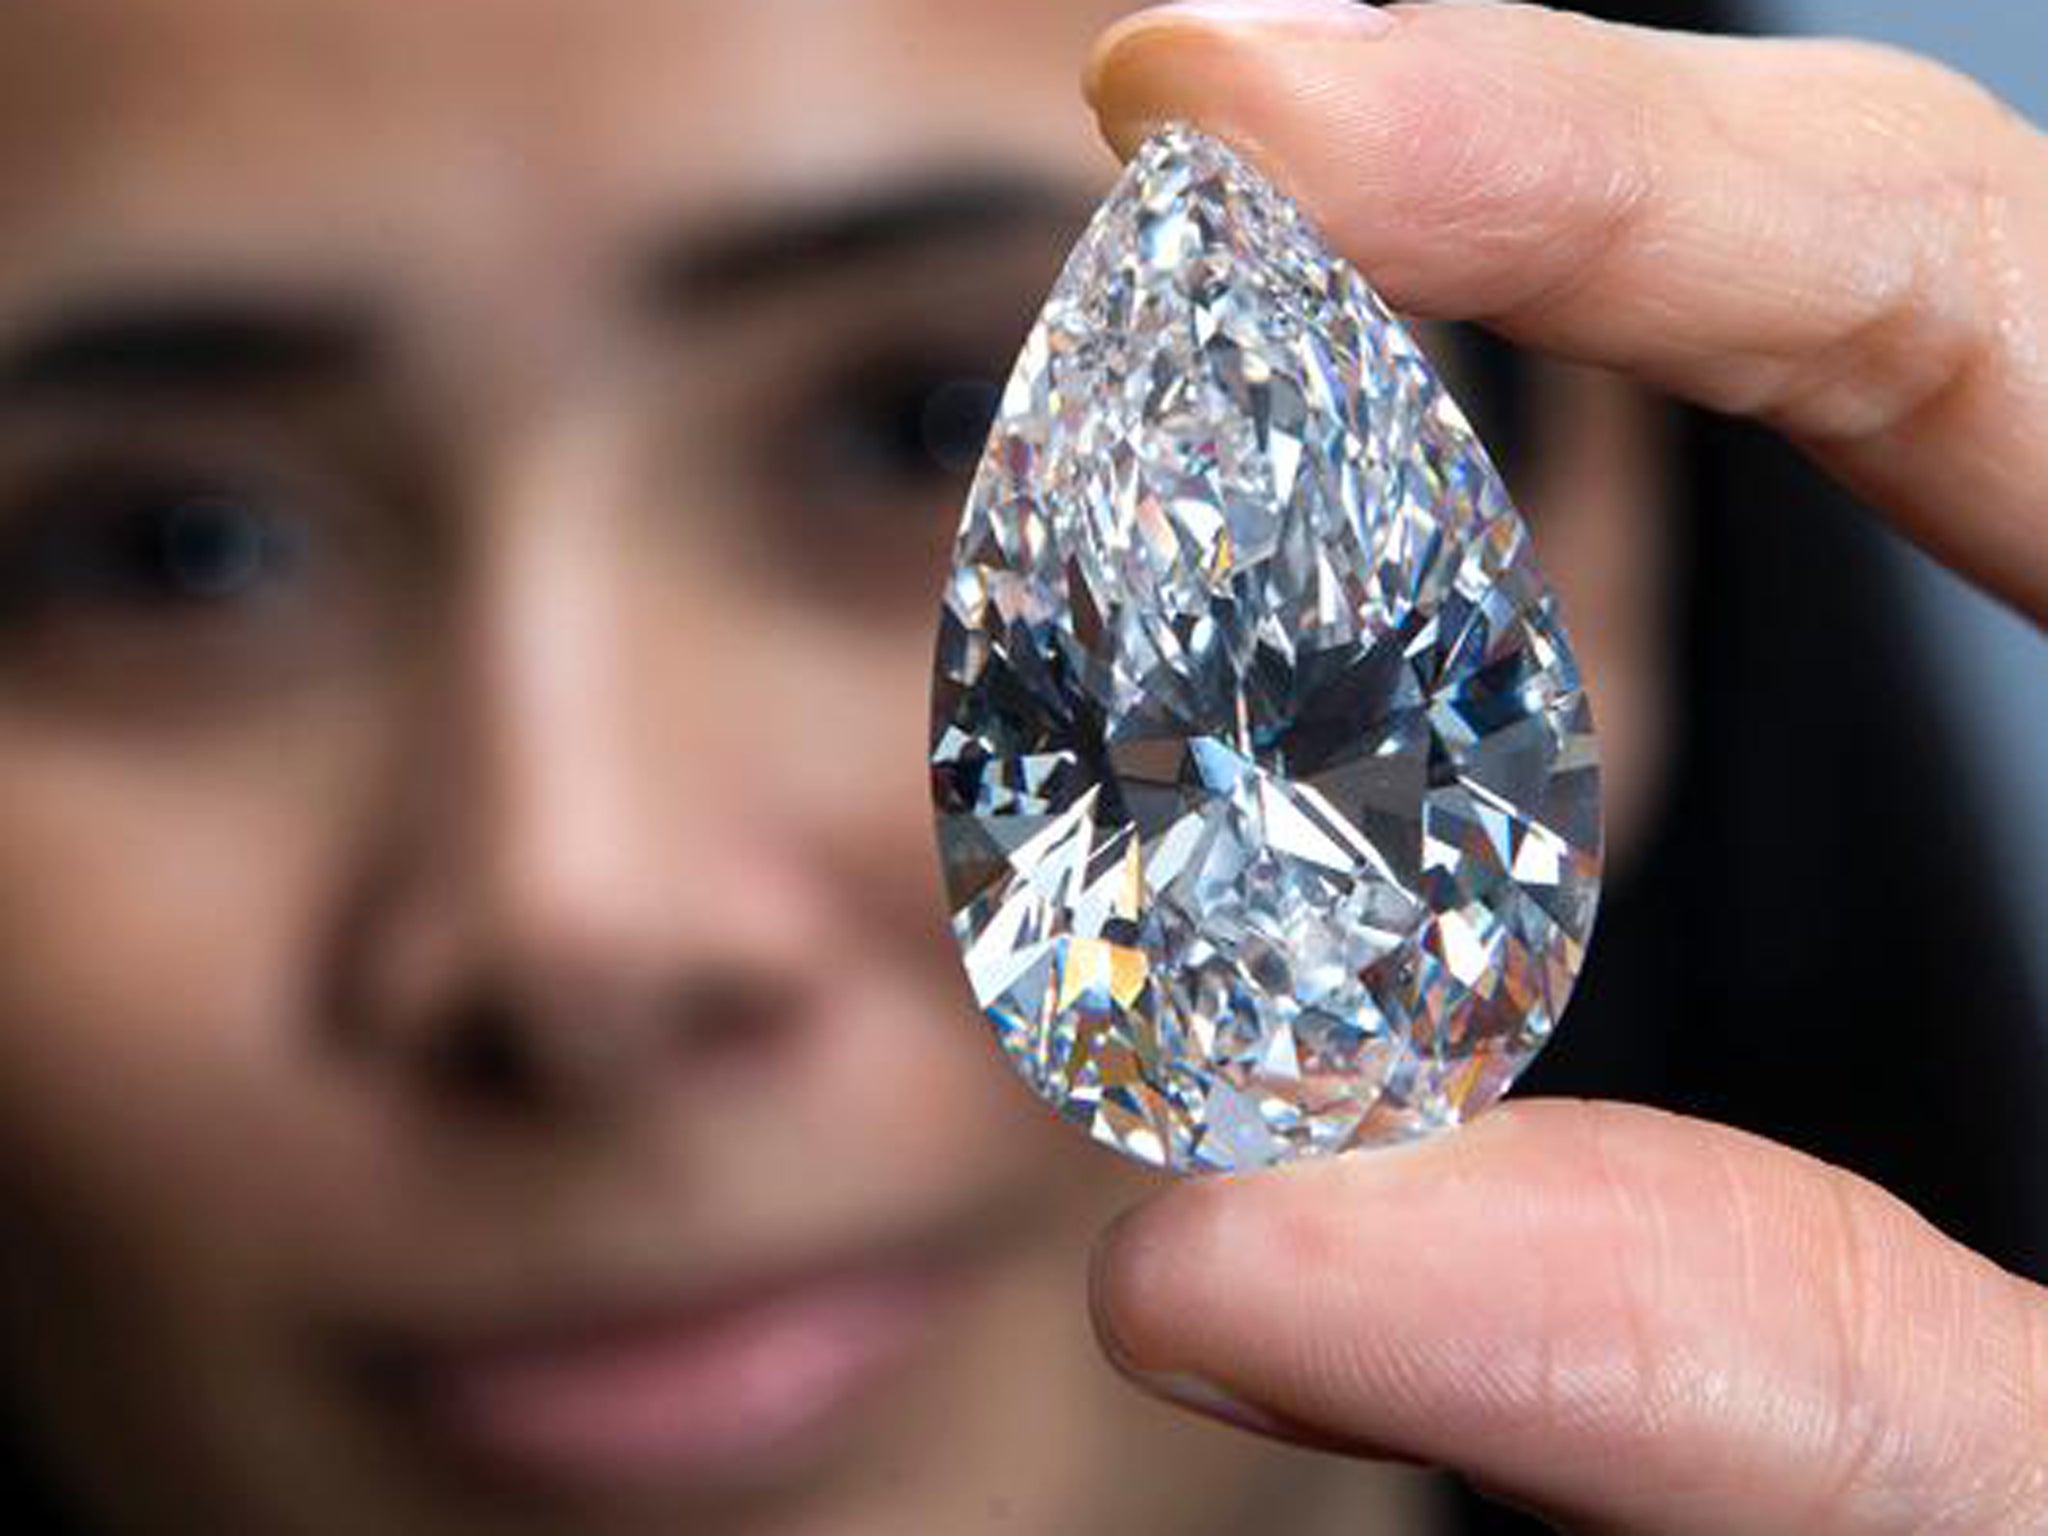 An employee of Christie's auction house shows the 101.73-carat gem, at a preview ahead of the auction